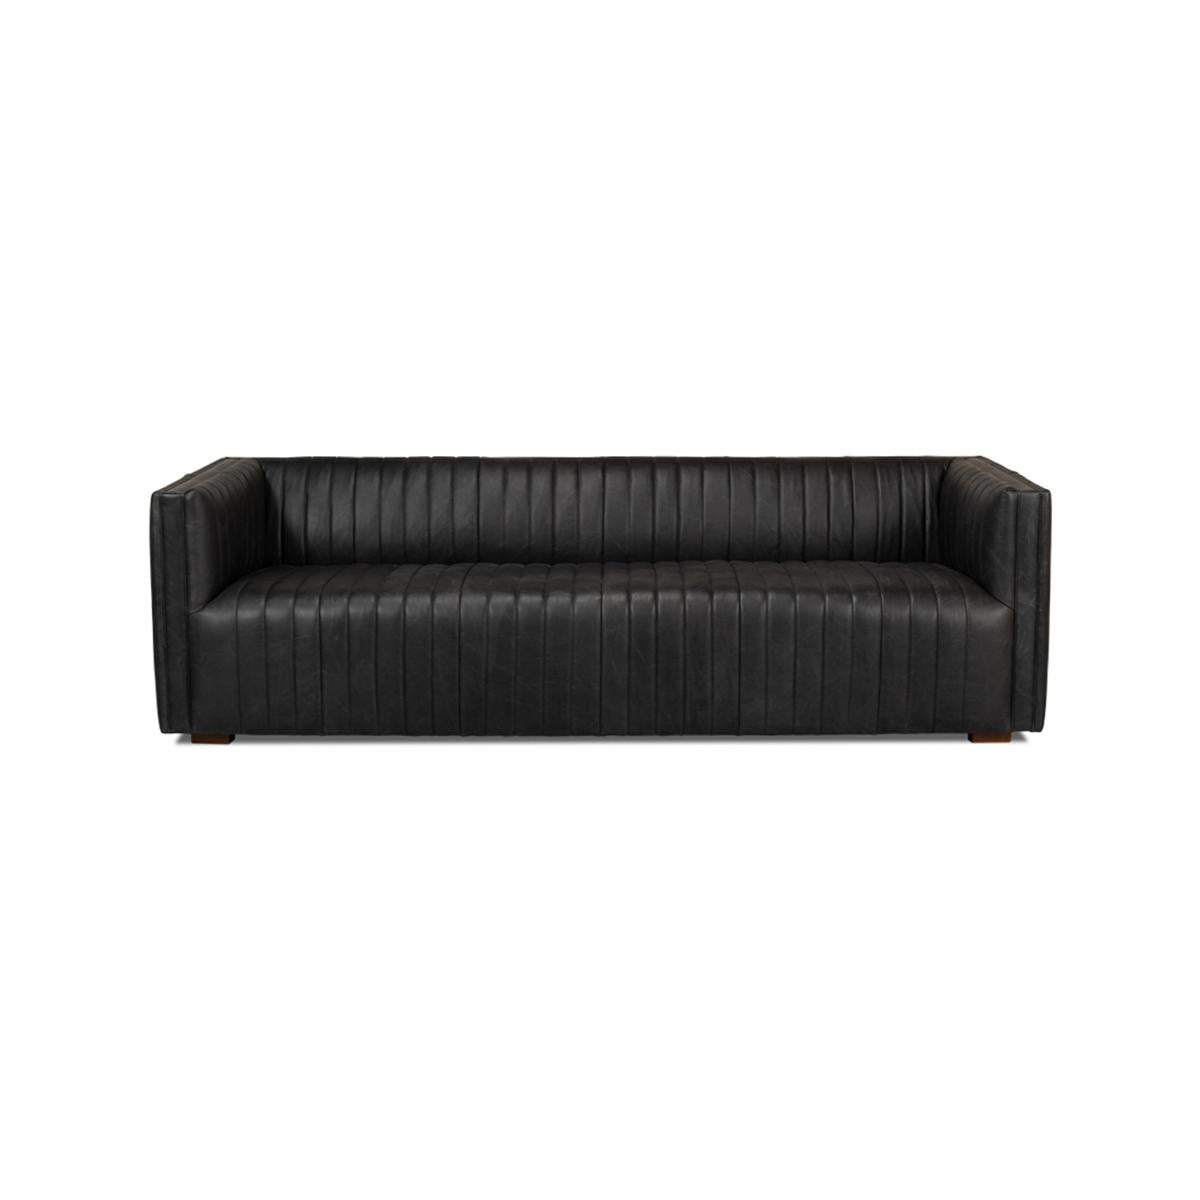 The eloquent sofa has a unique modern channeled leather design to the backrest, seat, arms and rear. 

At 96 inches long the generous proportions allow for comfortable conversations and will be a statement and any modern or traditionally designed